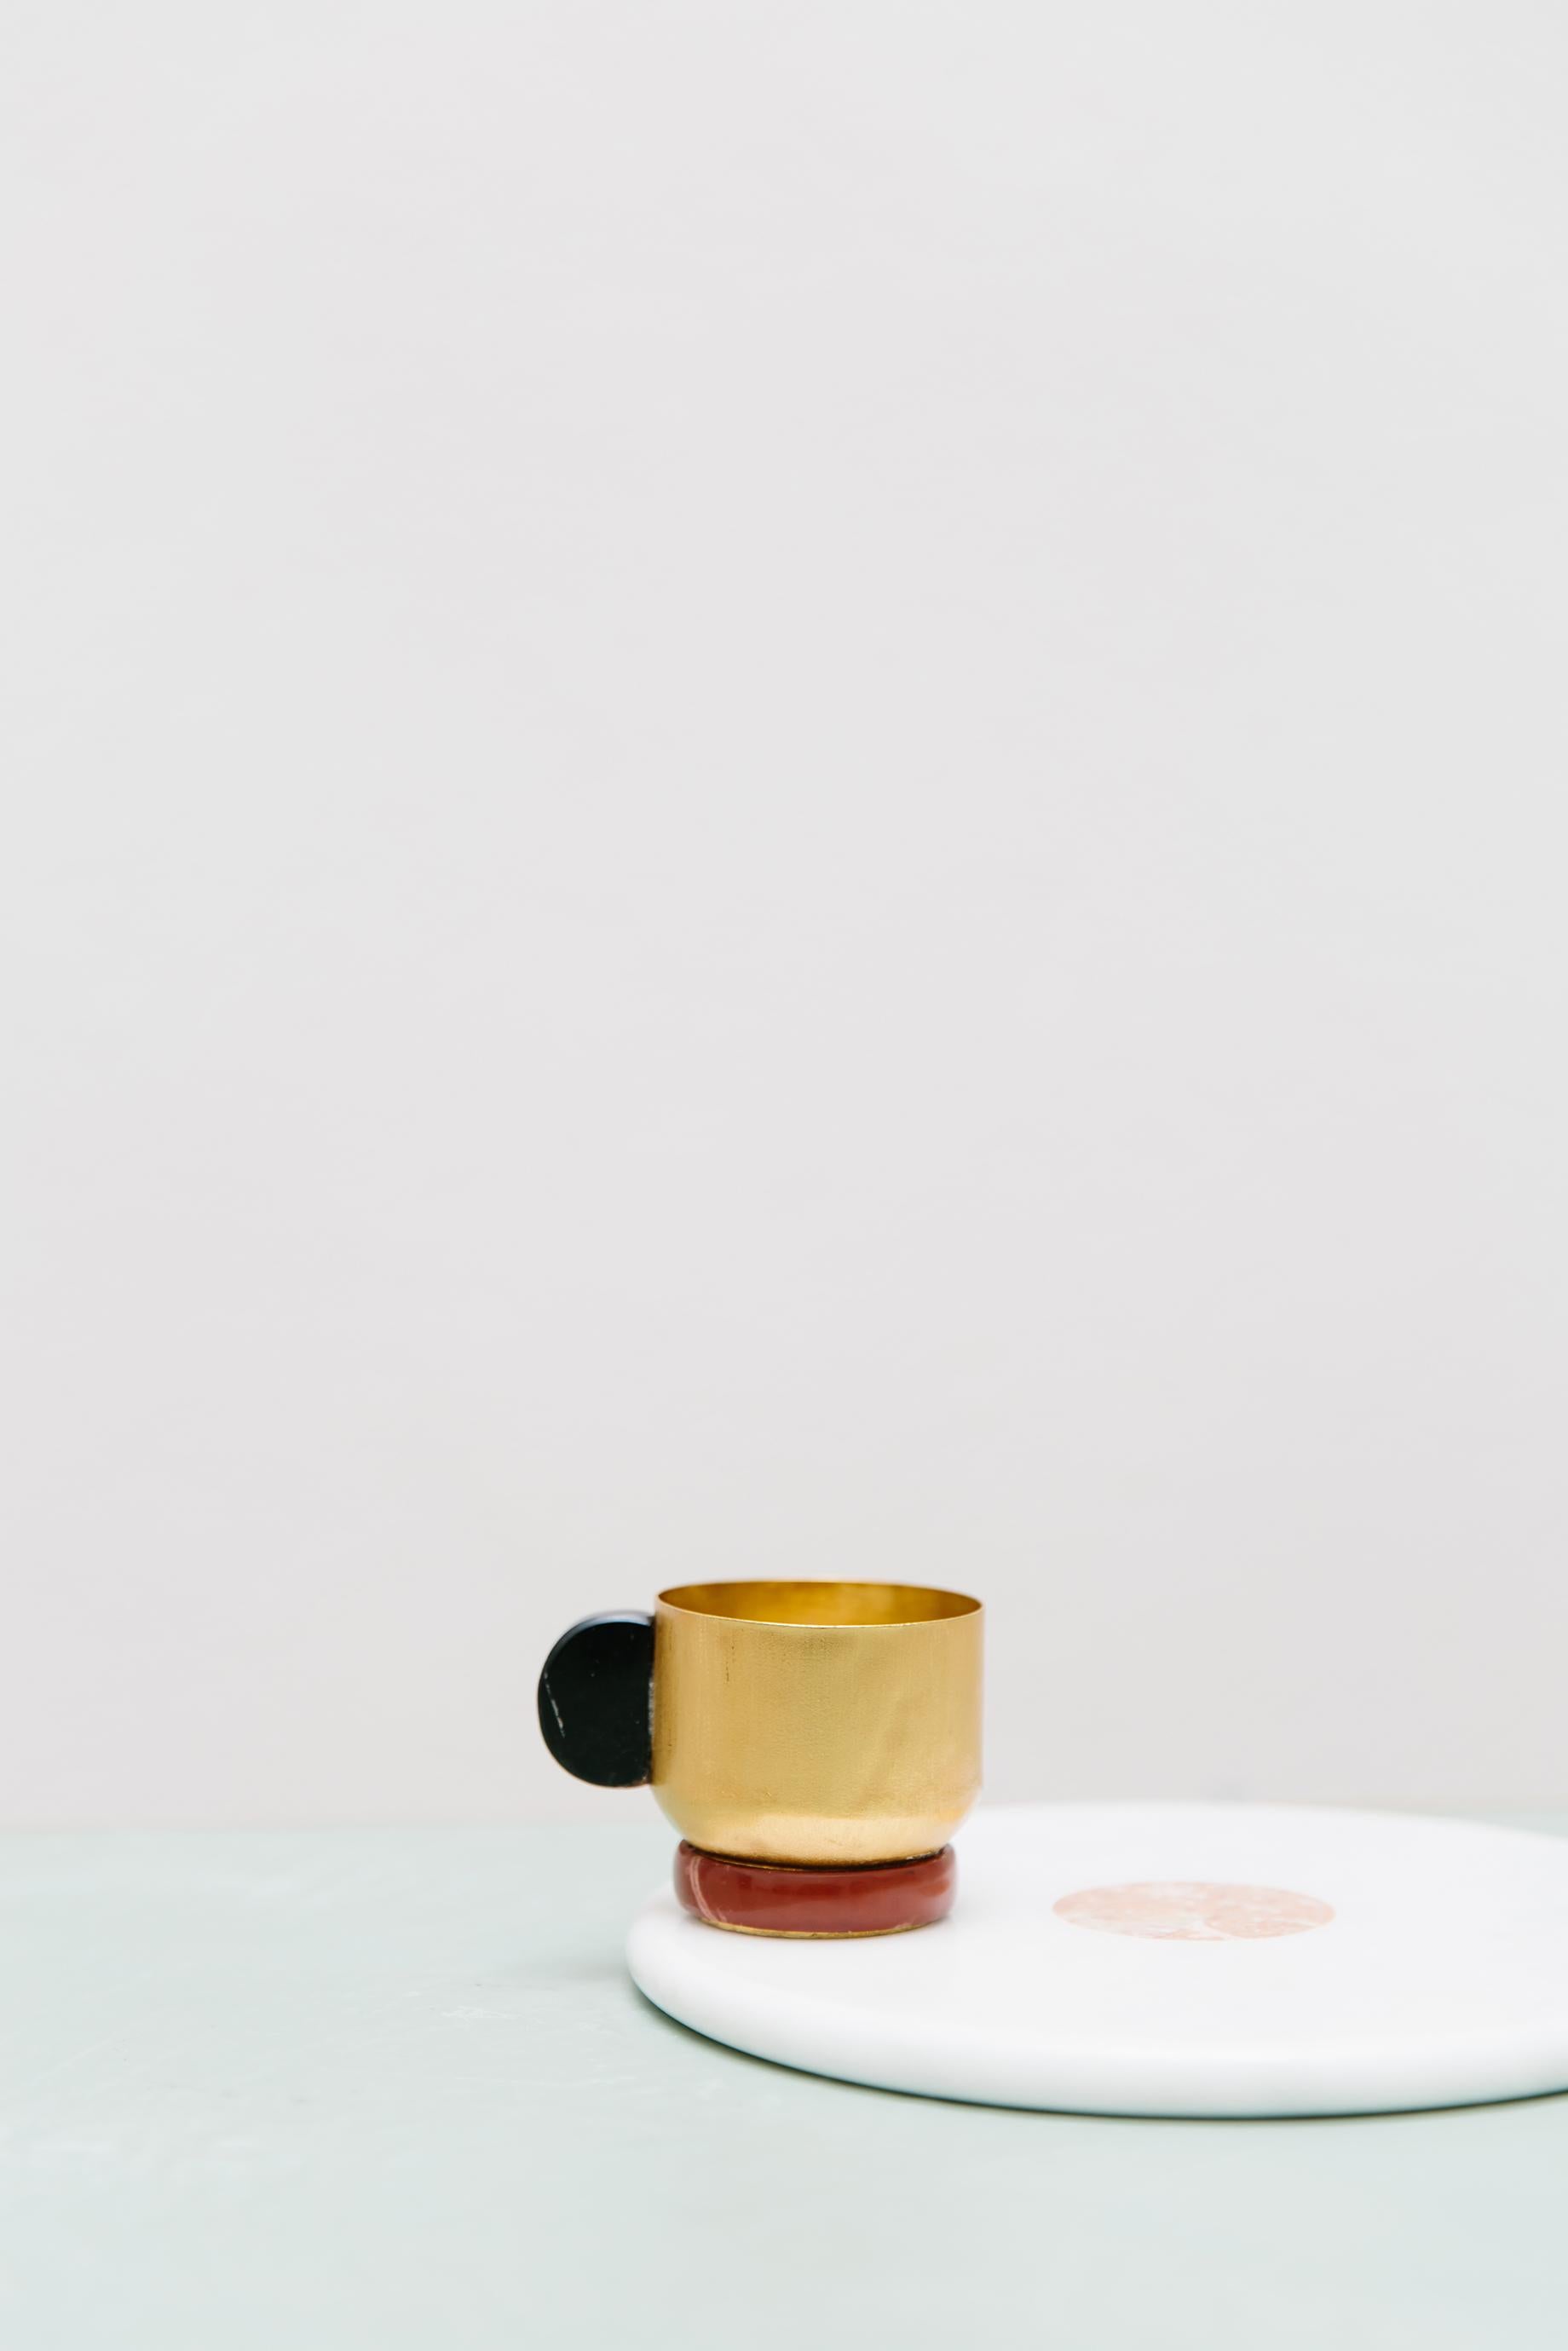 Elevate your daily tea or coffee ritual with our exquisite Onix cup. The plated brass cup is handcrafted in Italy using sheet turning techniques. The handle, adorned with a Onix stone, introduces a touch of jewelry-inspired sophistication to your